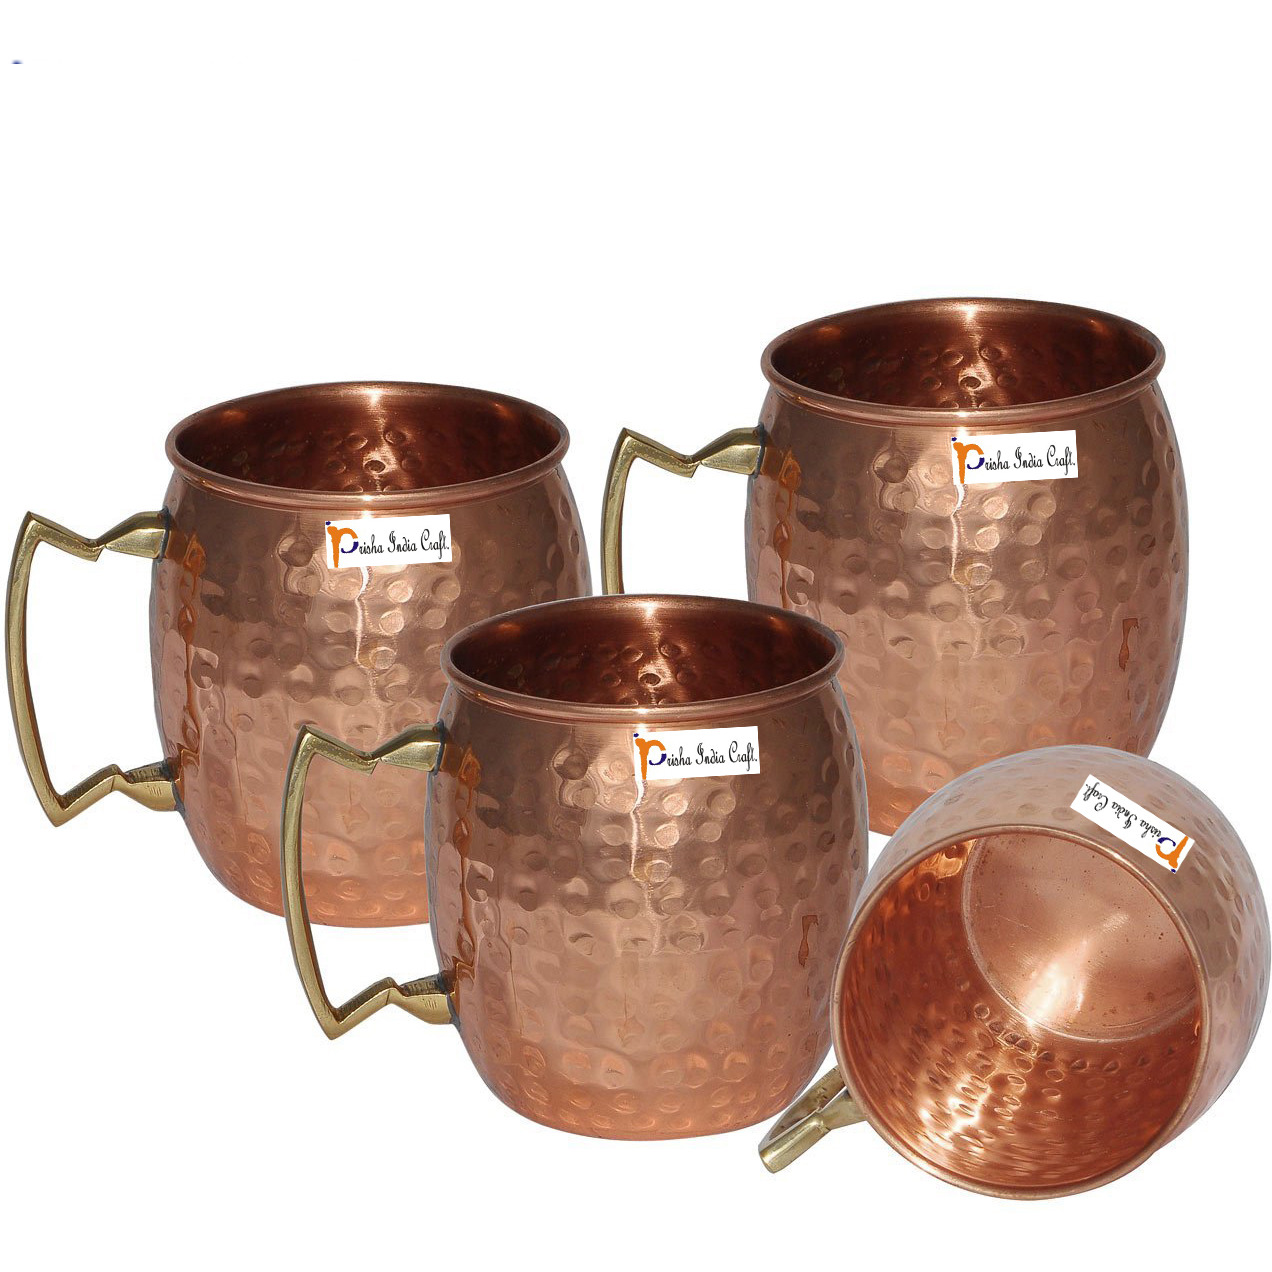 Set of 4 - Prisha India Craft B. Moscow Mule Solid Copper Mug 550 ML / 18 oz - 100% Pure Copper Hammered Best Quality Lacquered Finish, Cocktail Cup, Copper Mugs, Cocktail Mugs with No Inner Linings